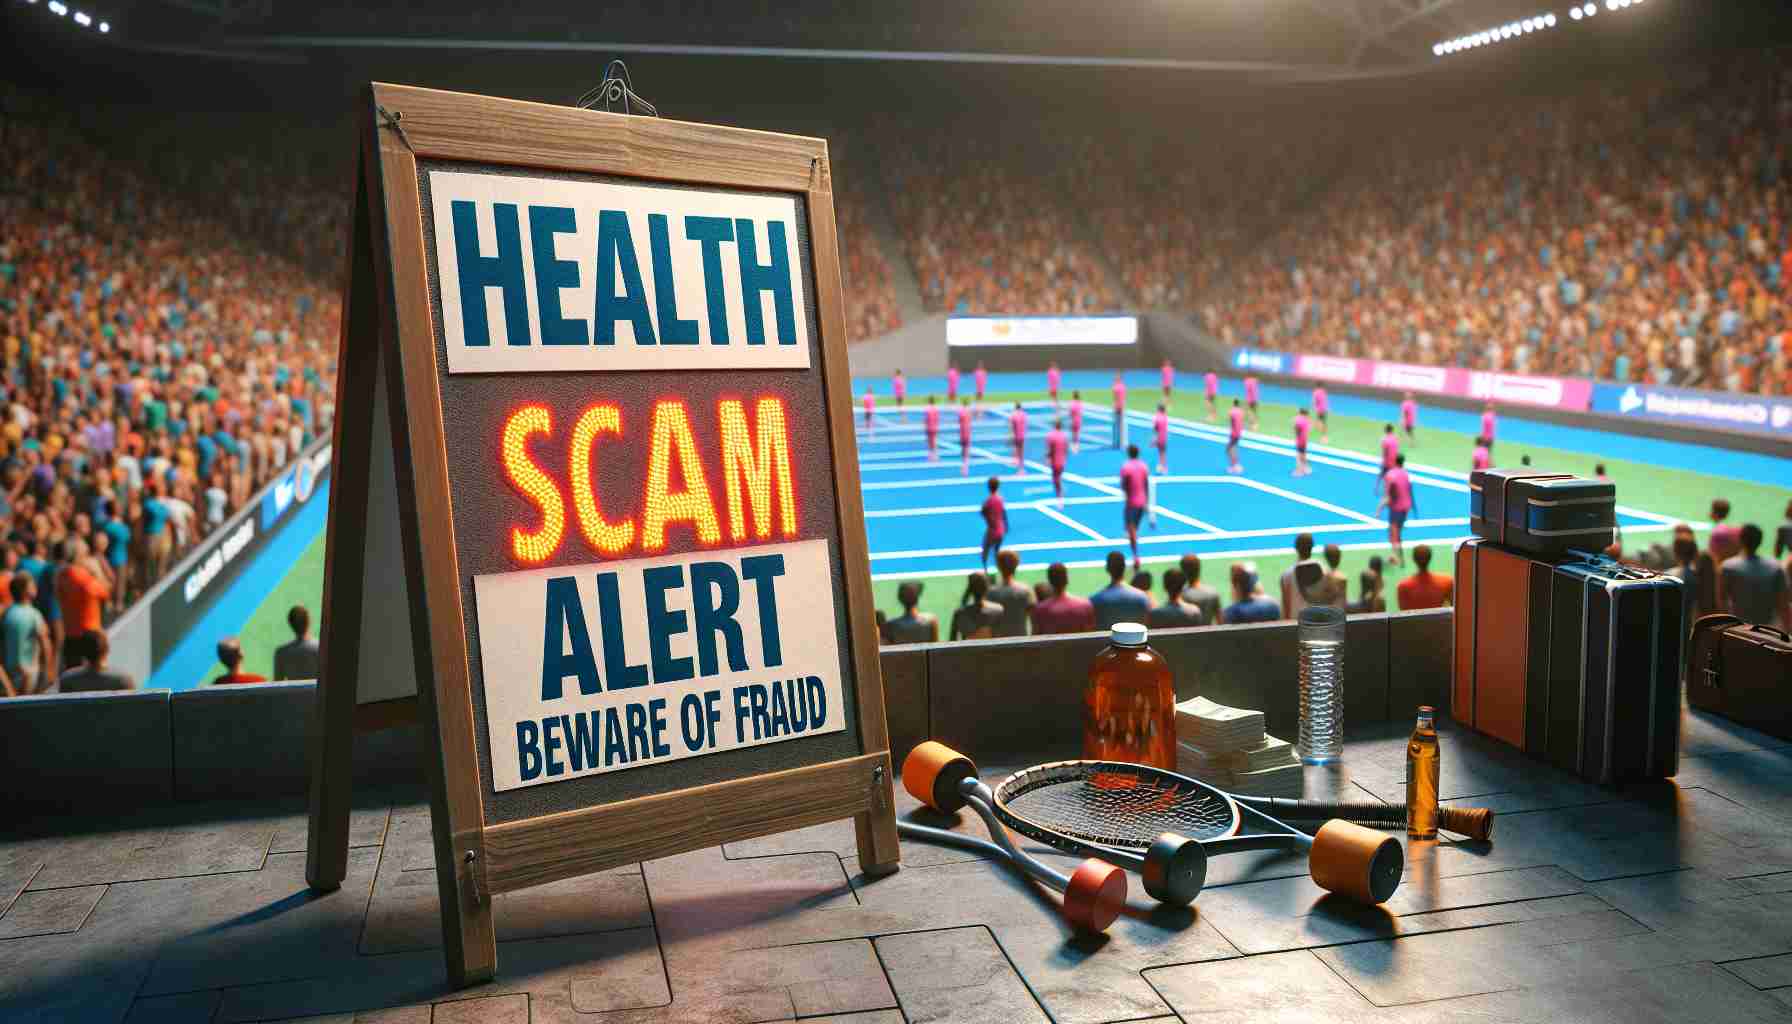 A detailed and realistic HD depiction of a health scam alert. The alert is attached to a board in a public space during a major sporting event. The board is placed next to sports equipment and there's a chaotic background that reflects the crowd and fervor of an ongoing sporting event. The words 'Health Scam Alert: Beware of Fraud' are clearly written on the sign.